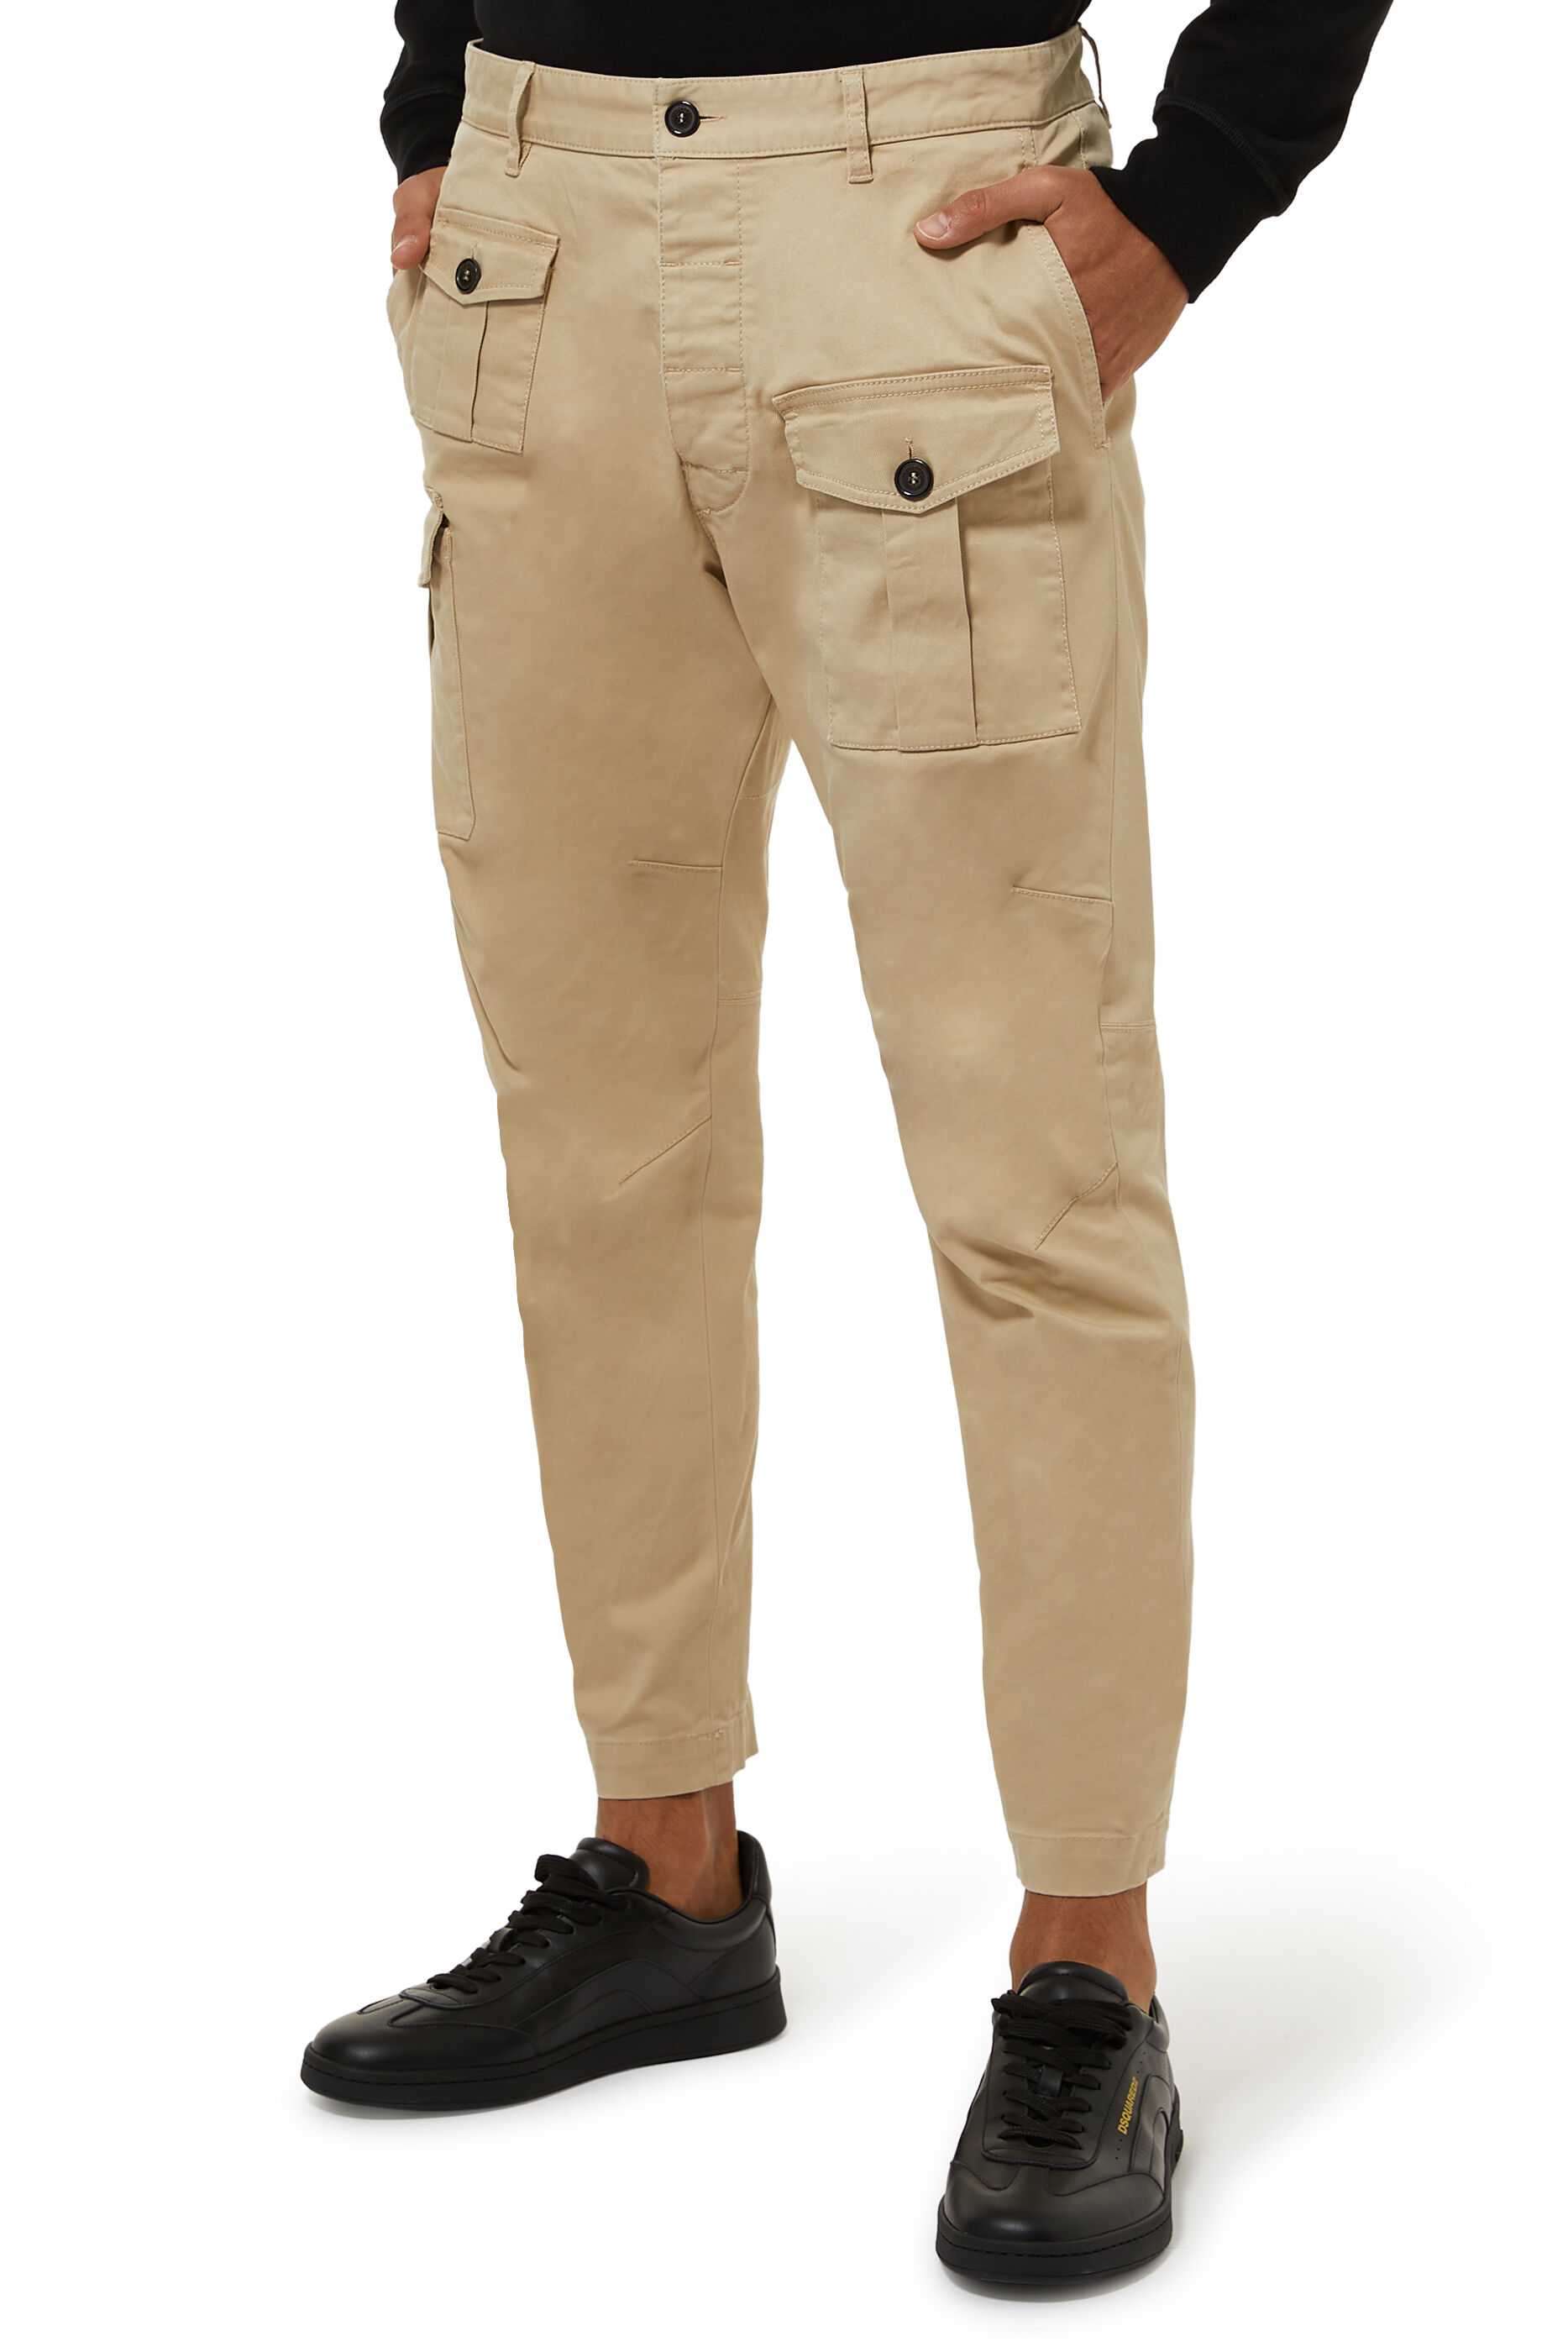 ASOS DESIGN Oversized Cropped Cargo Pants With Rip And Repair Details In  Sand  ShopStyle  Mens cargo trousers Cropped cargo pants Asos menswear